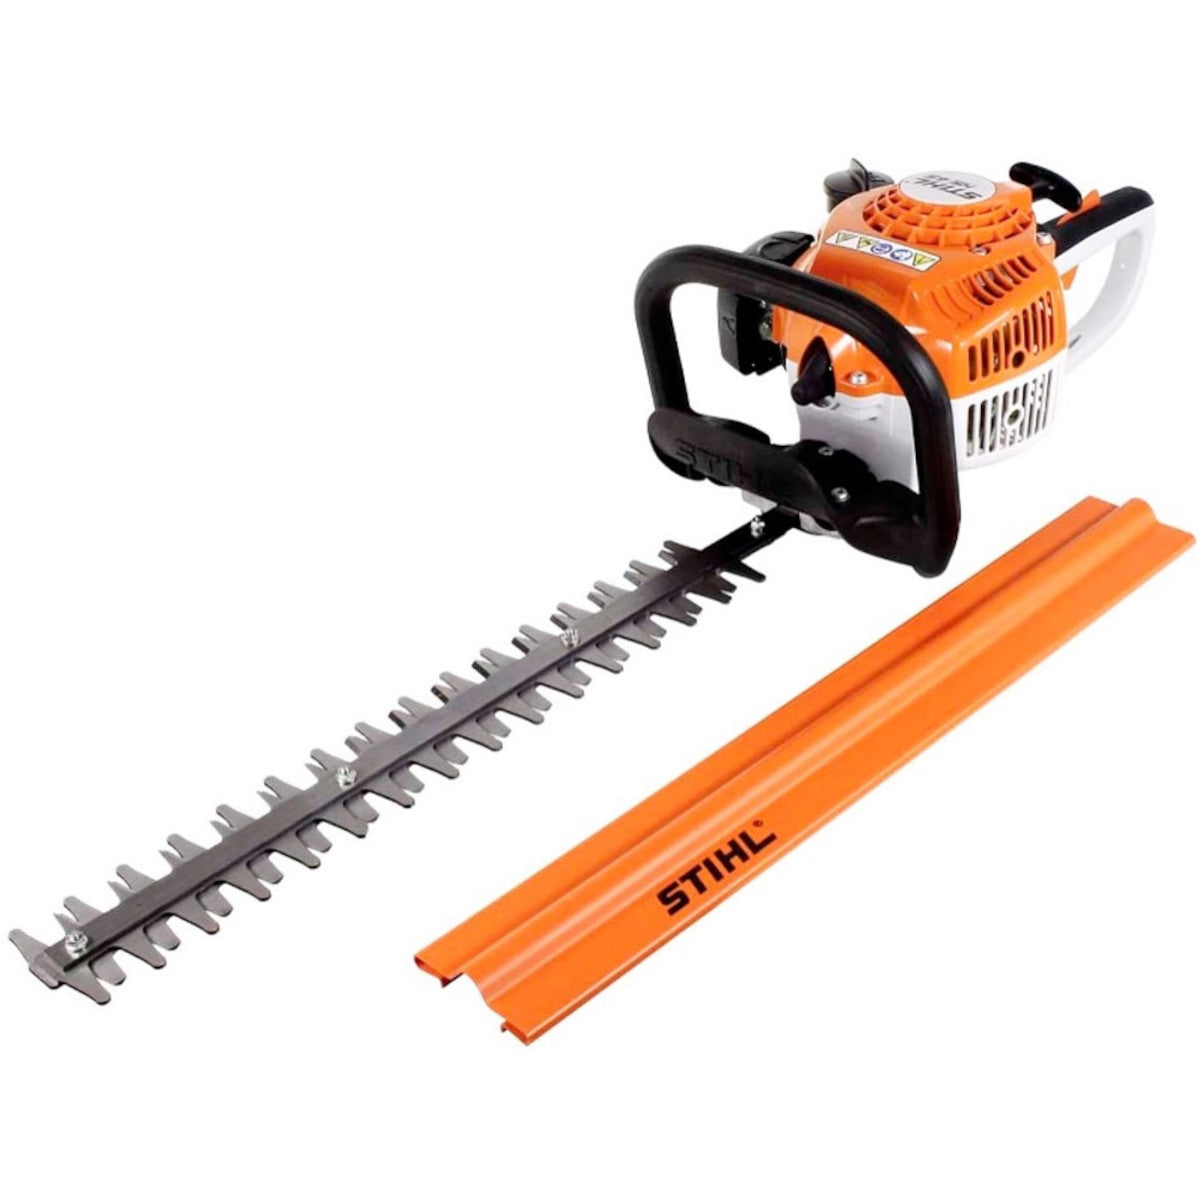 Taille-haie Thermique Stihl HS45 45cm – Somagri